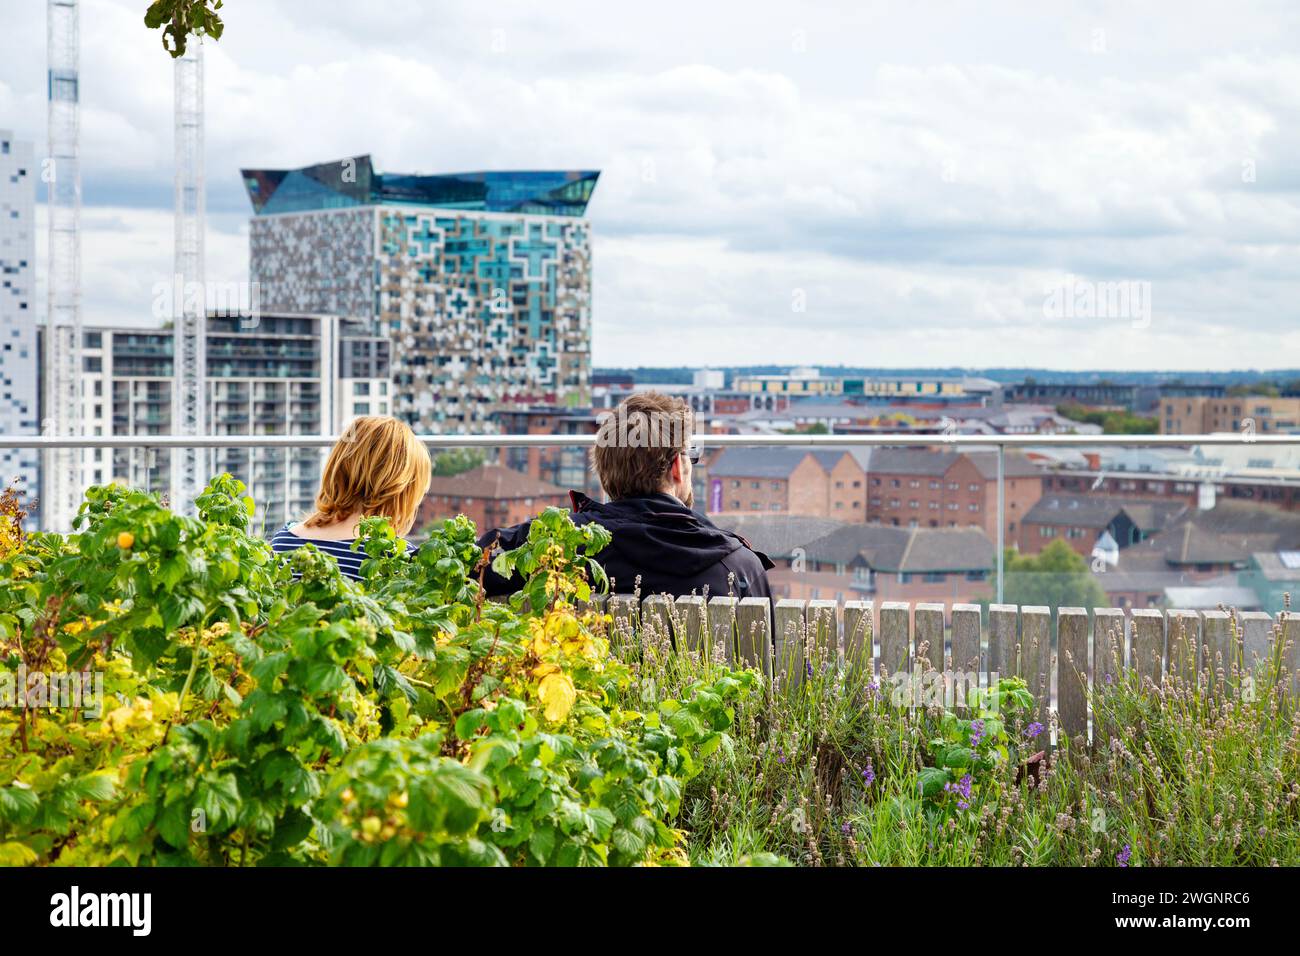 People looking at views of the city from the Birmingham Library rooftop garden, Birmingham, West Midlands, England Stock Photo